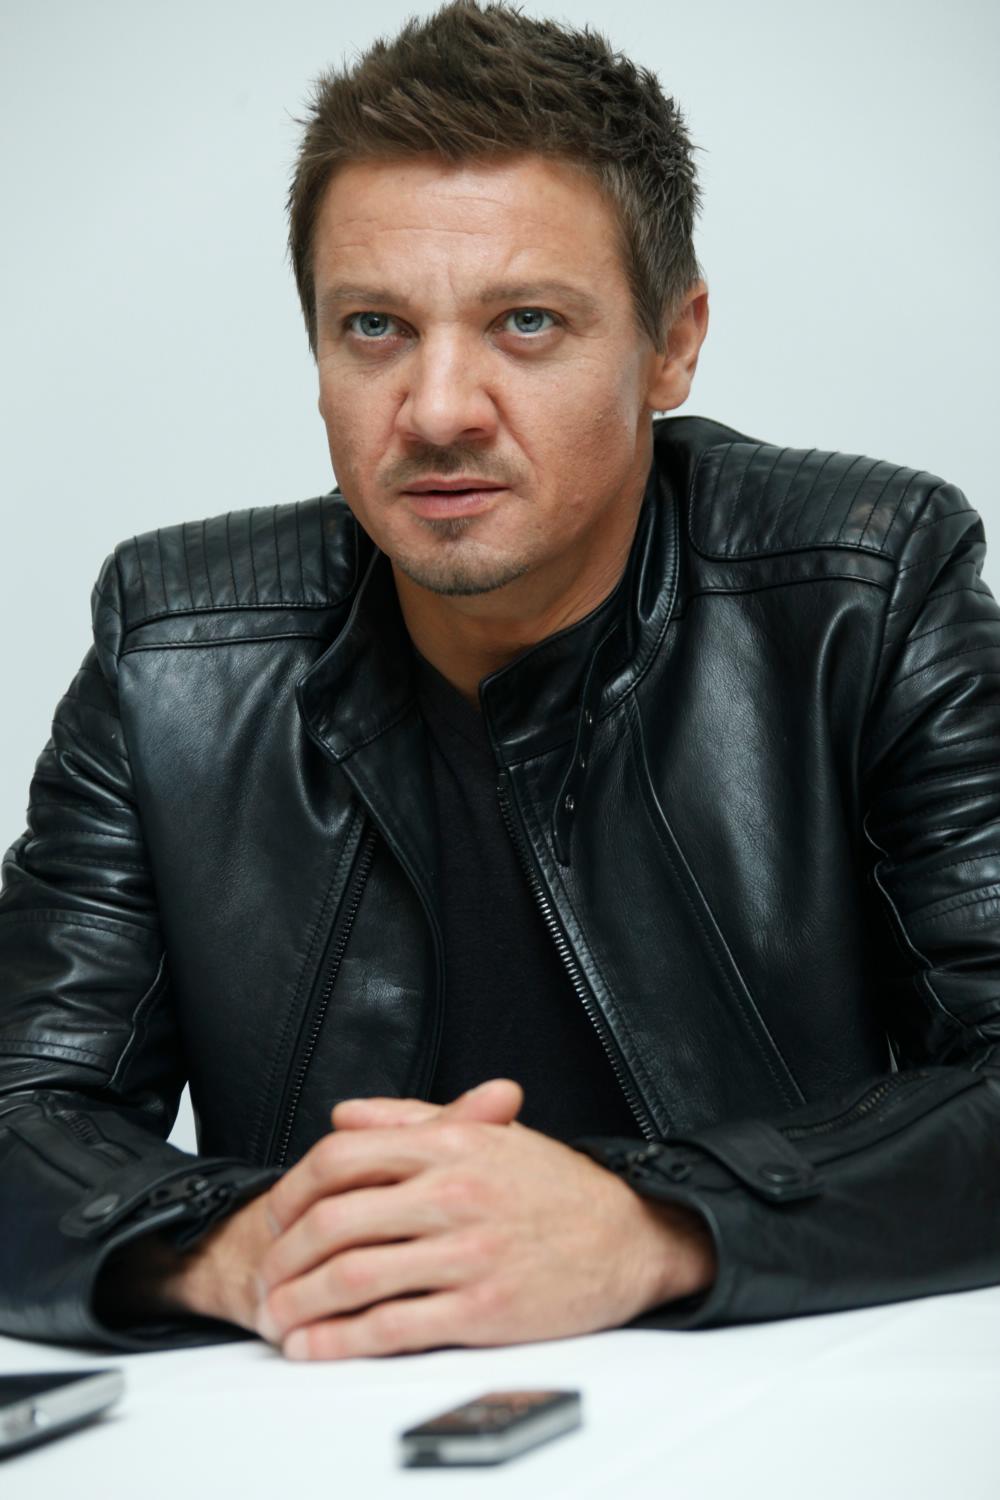 Jeremy Renner at The Avengers: Age of Ultron Press Conference